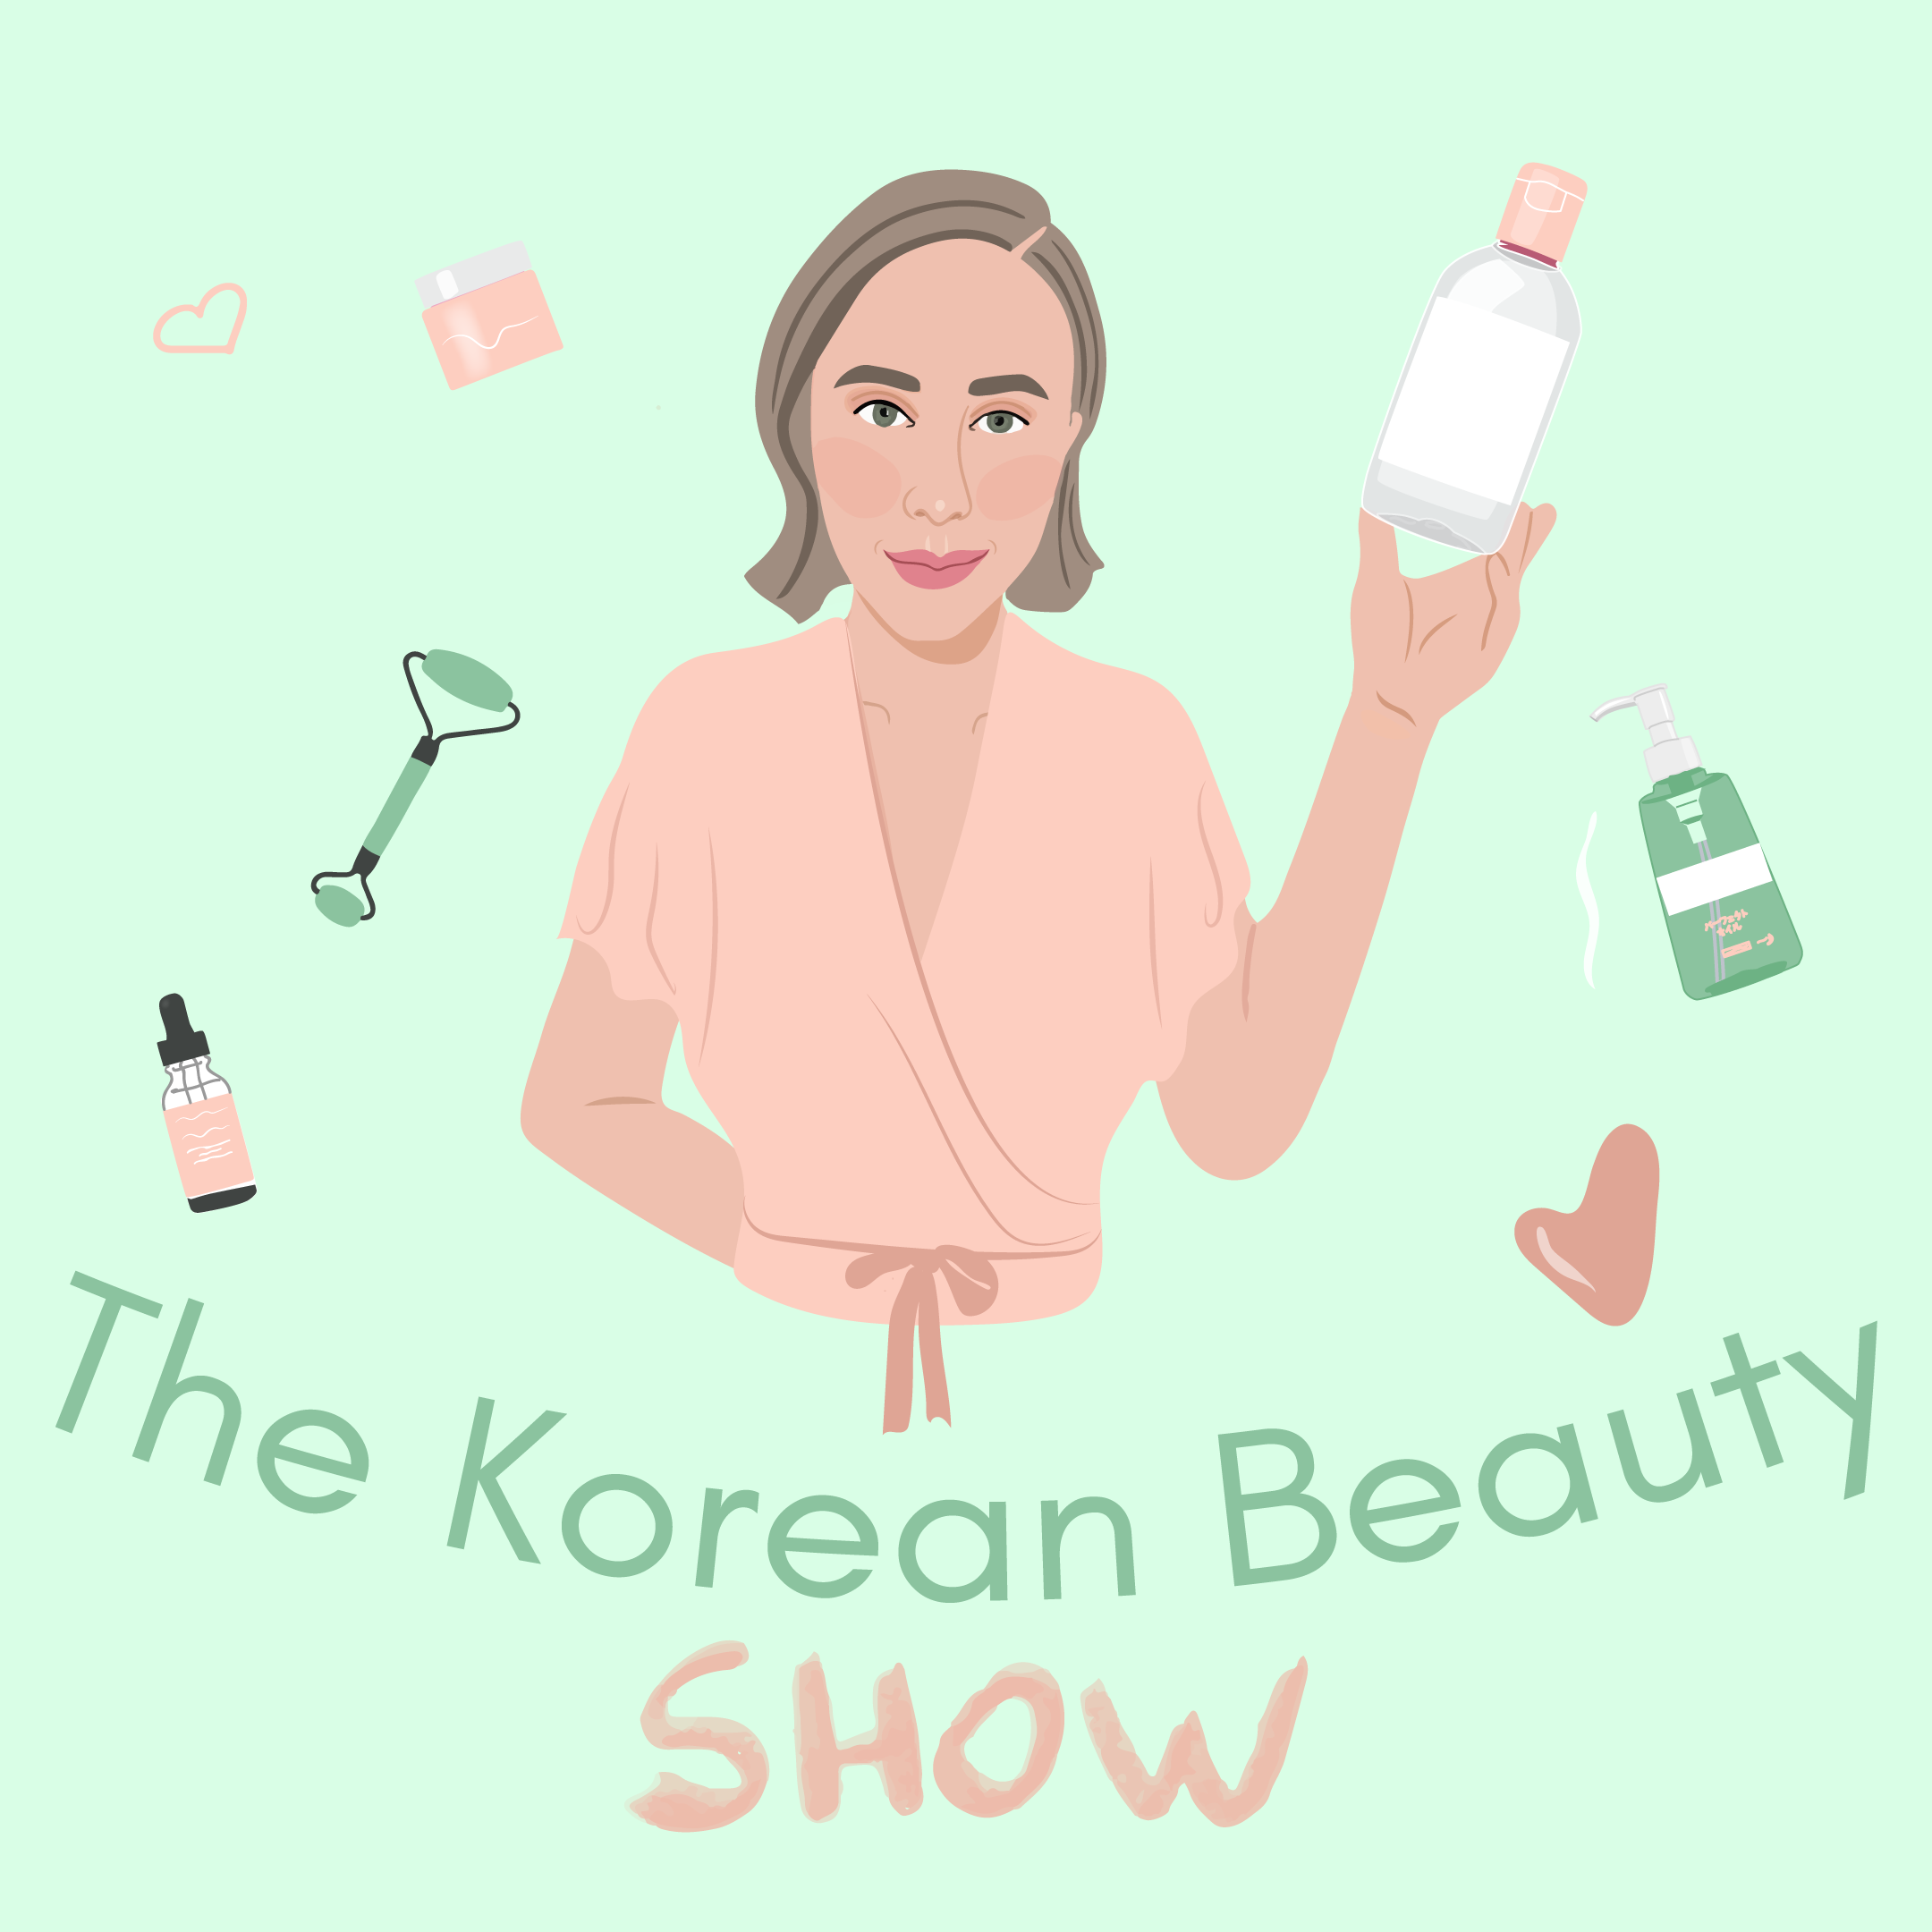 The latest cosmetic research from Korea